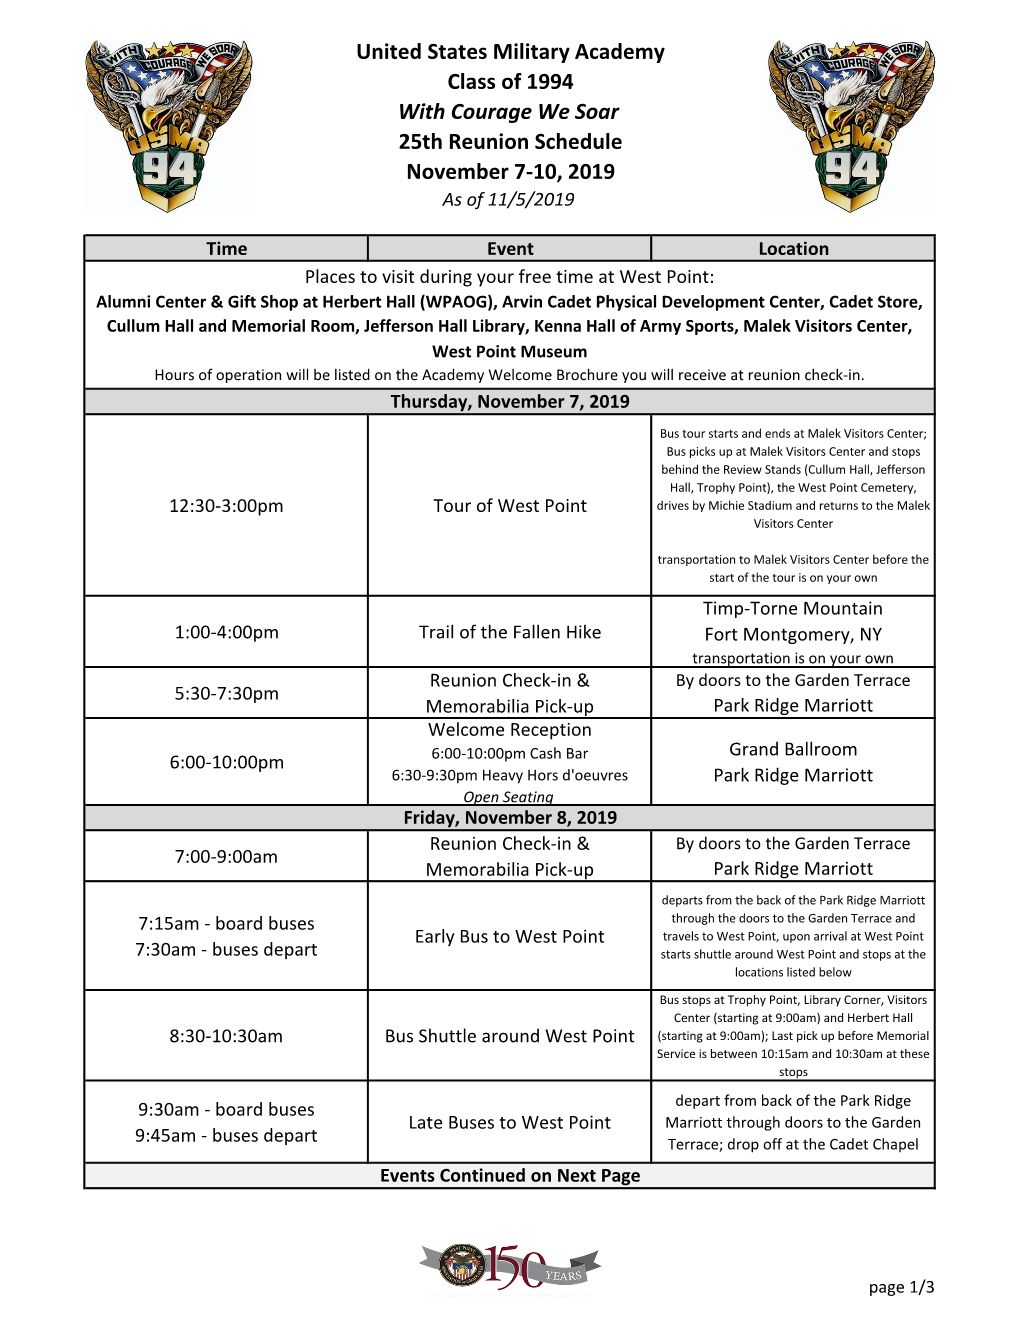 United States Military Academy Class of 1994 with Courage We Soar 25Th Reunion Schedule November 7-10, 2019 As of 11/5/2019